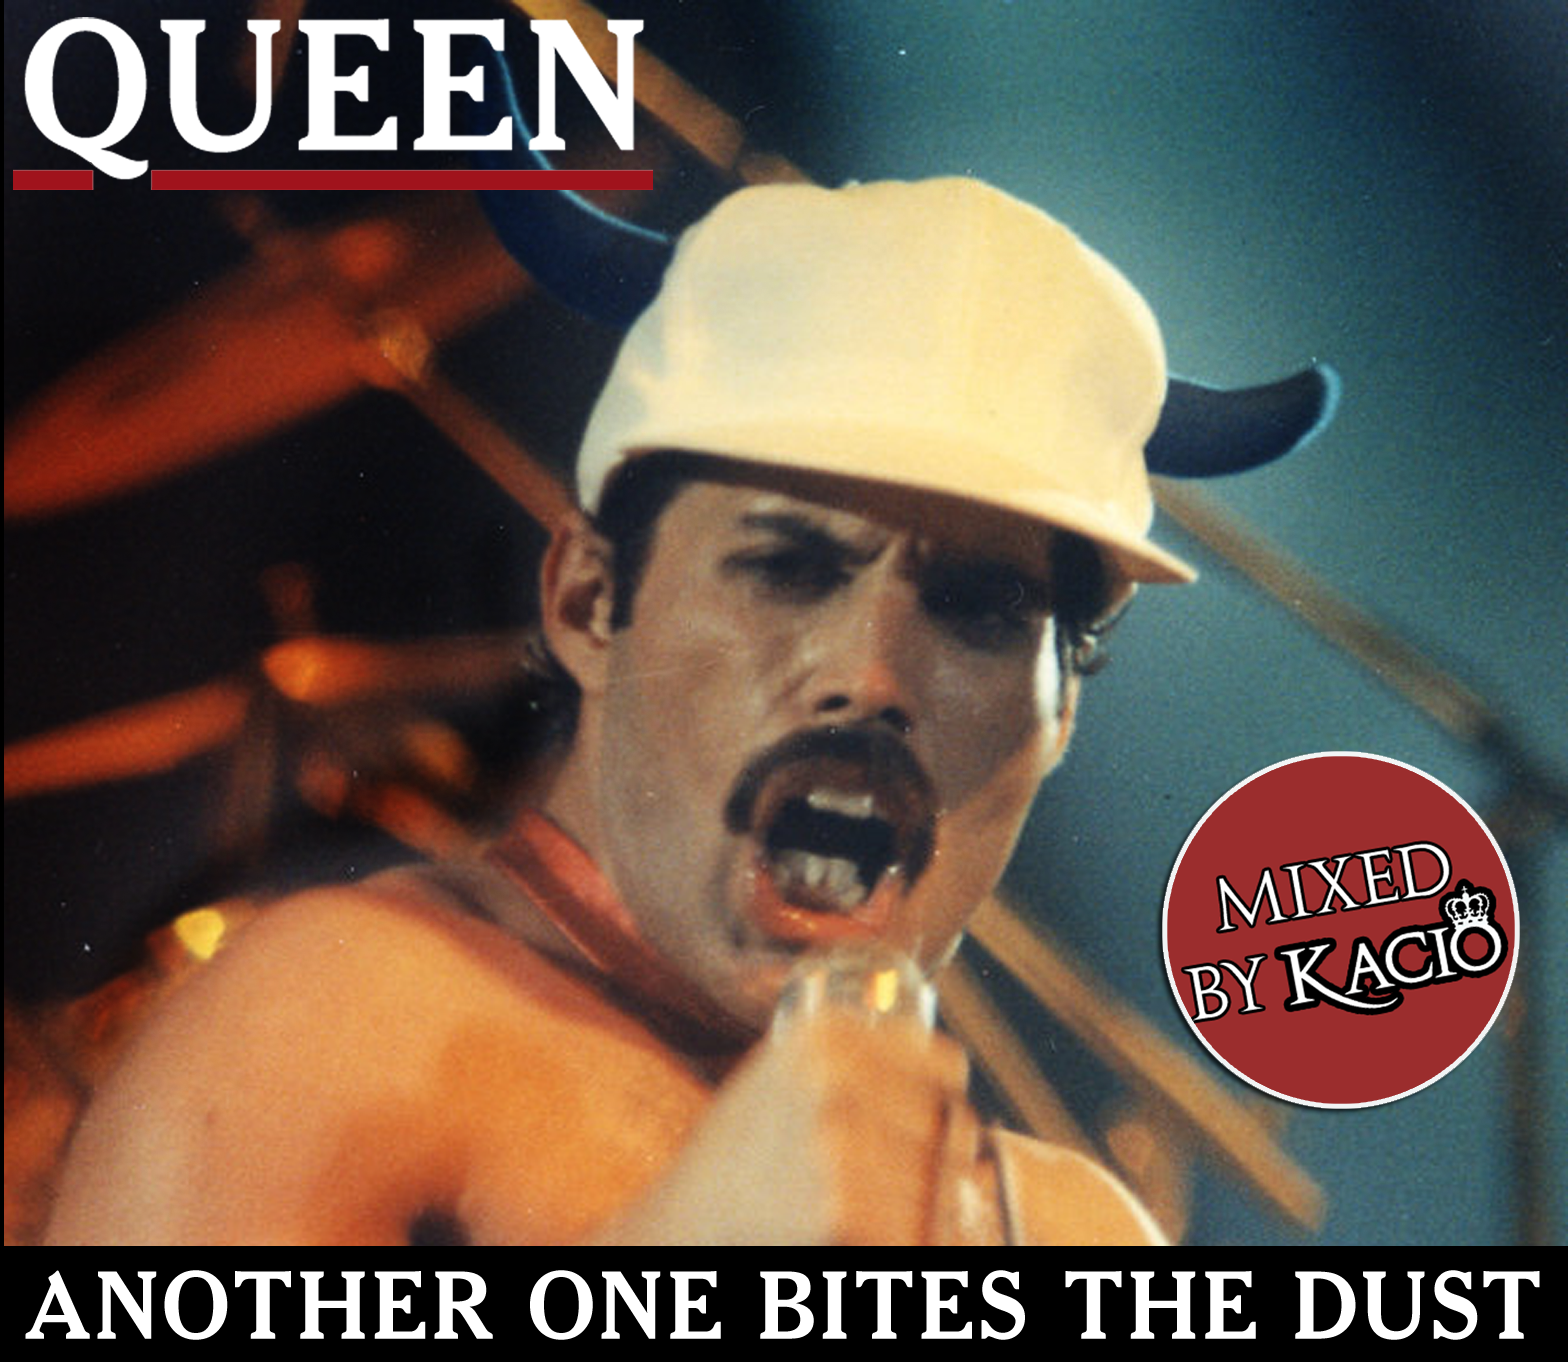 Found another one. Freddie Mercury another one bites the Dust. Песня Queen another one bites the Dust. Bites the Dust Queen. Queen another one bites the Dust album.